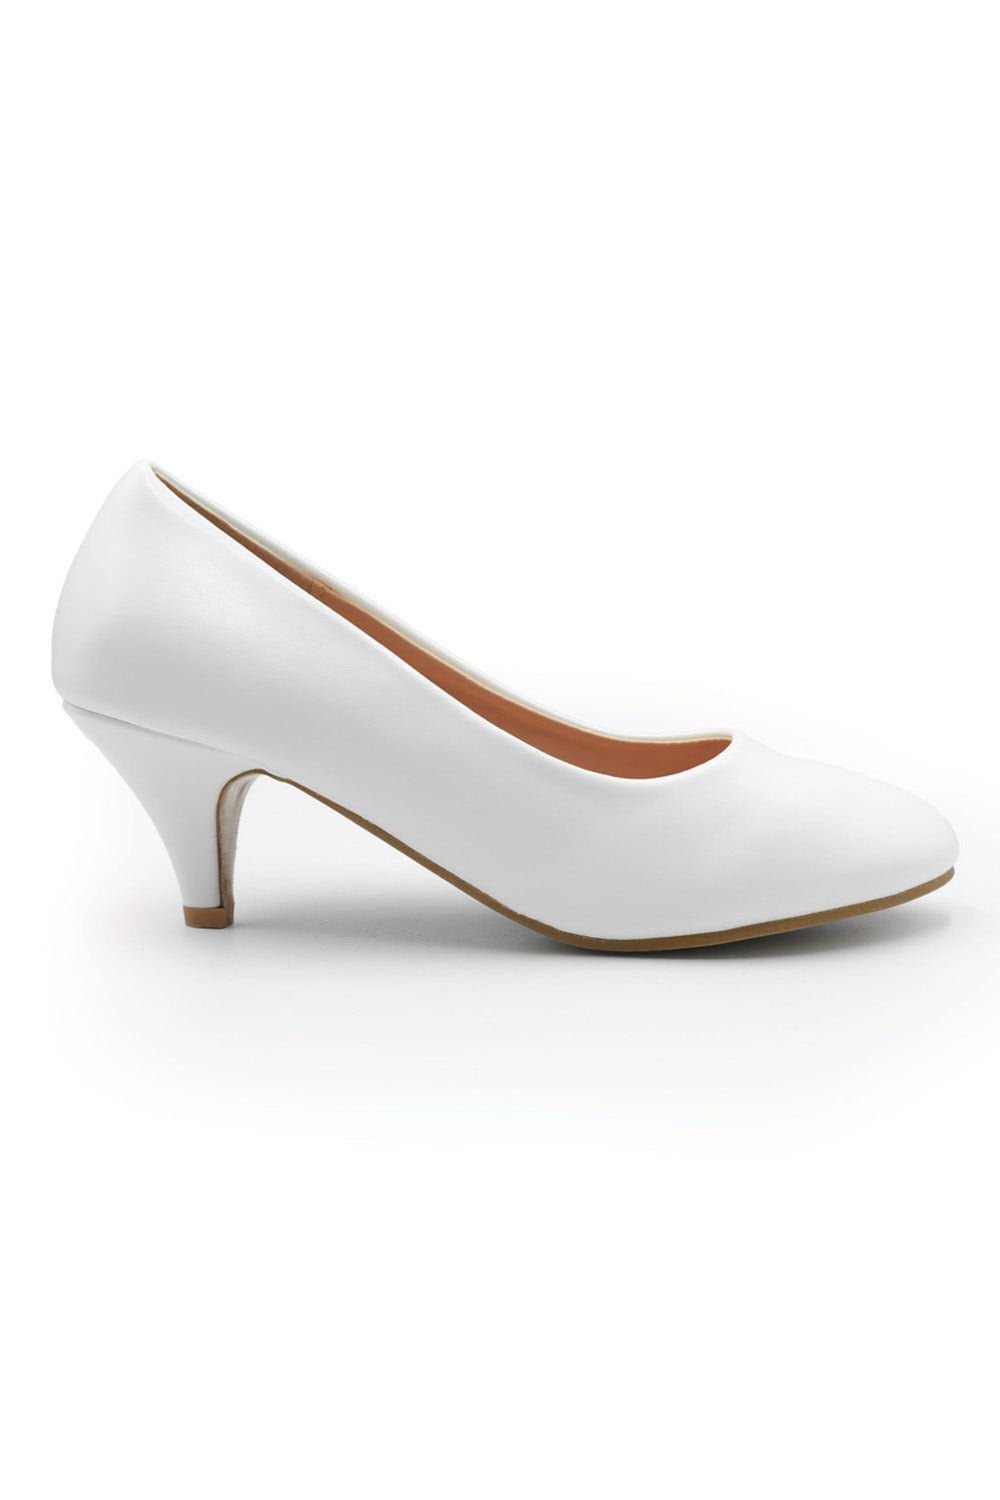 SHEA LOW HEEL COURT PUMP IN WHITE FAUX LEATHER